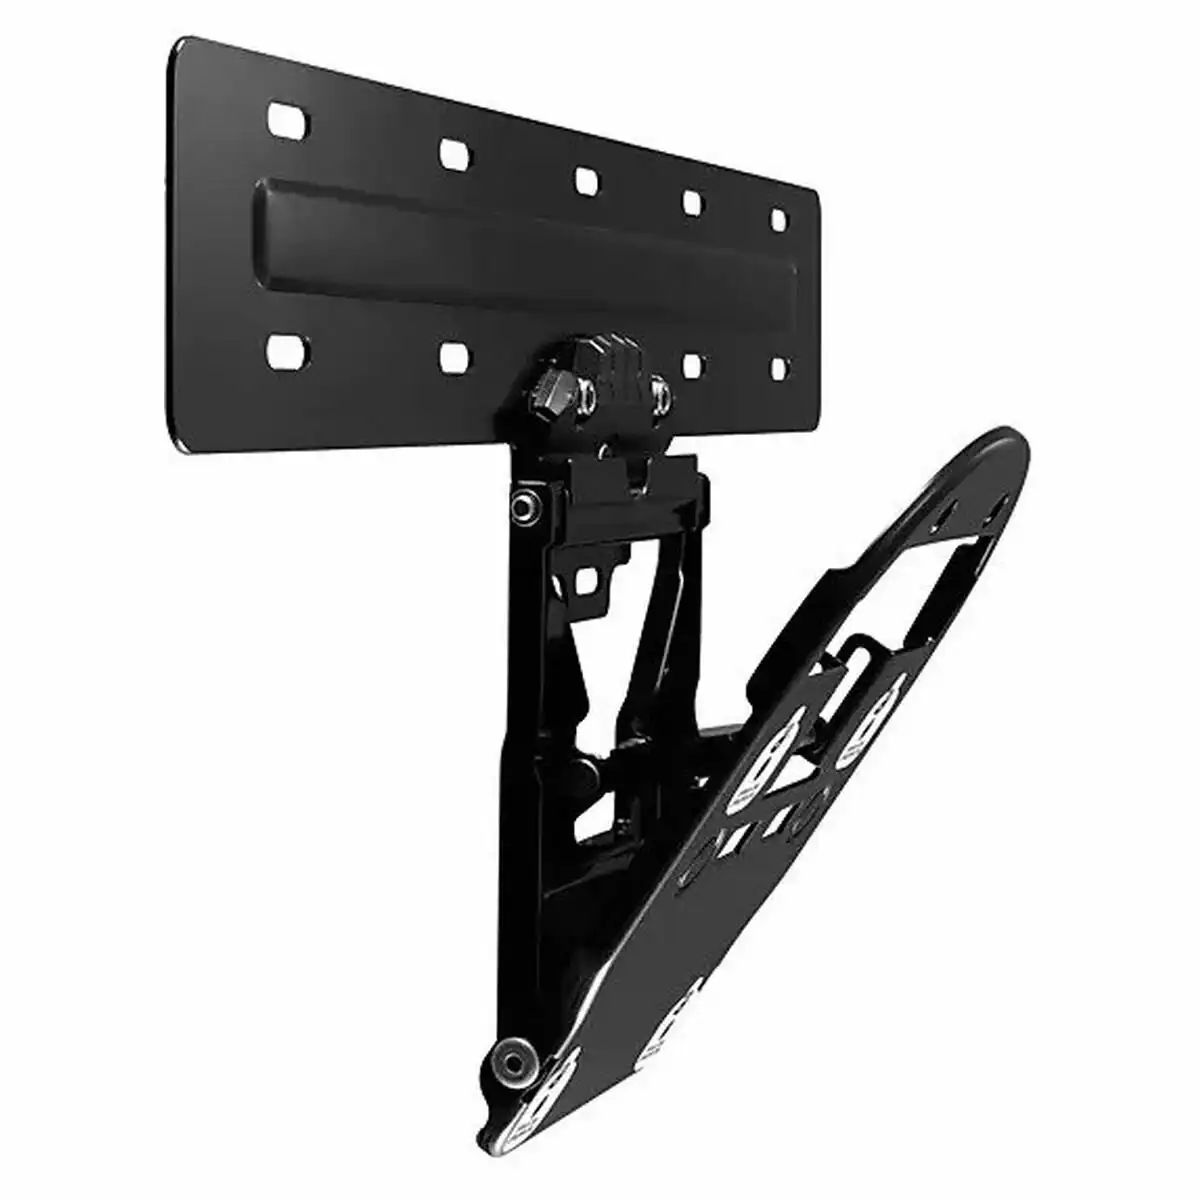 Samsung No Gap Wall Mount For QLED TV -